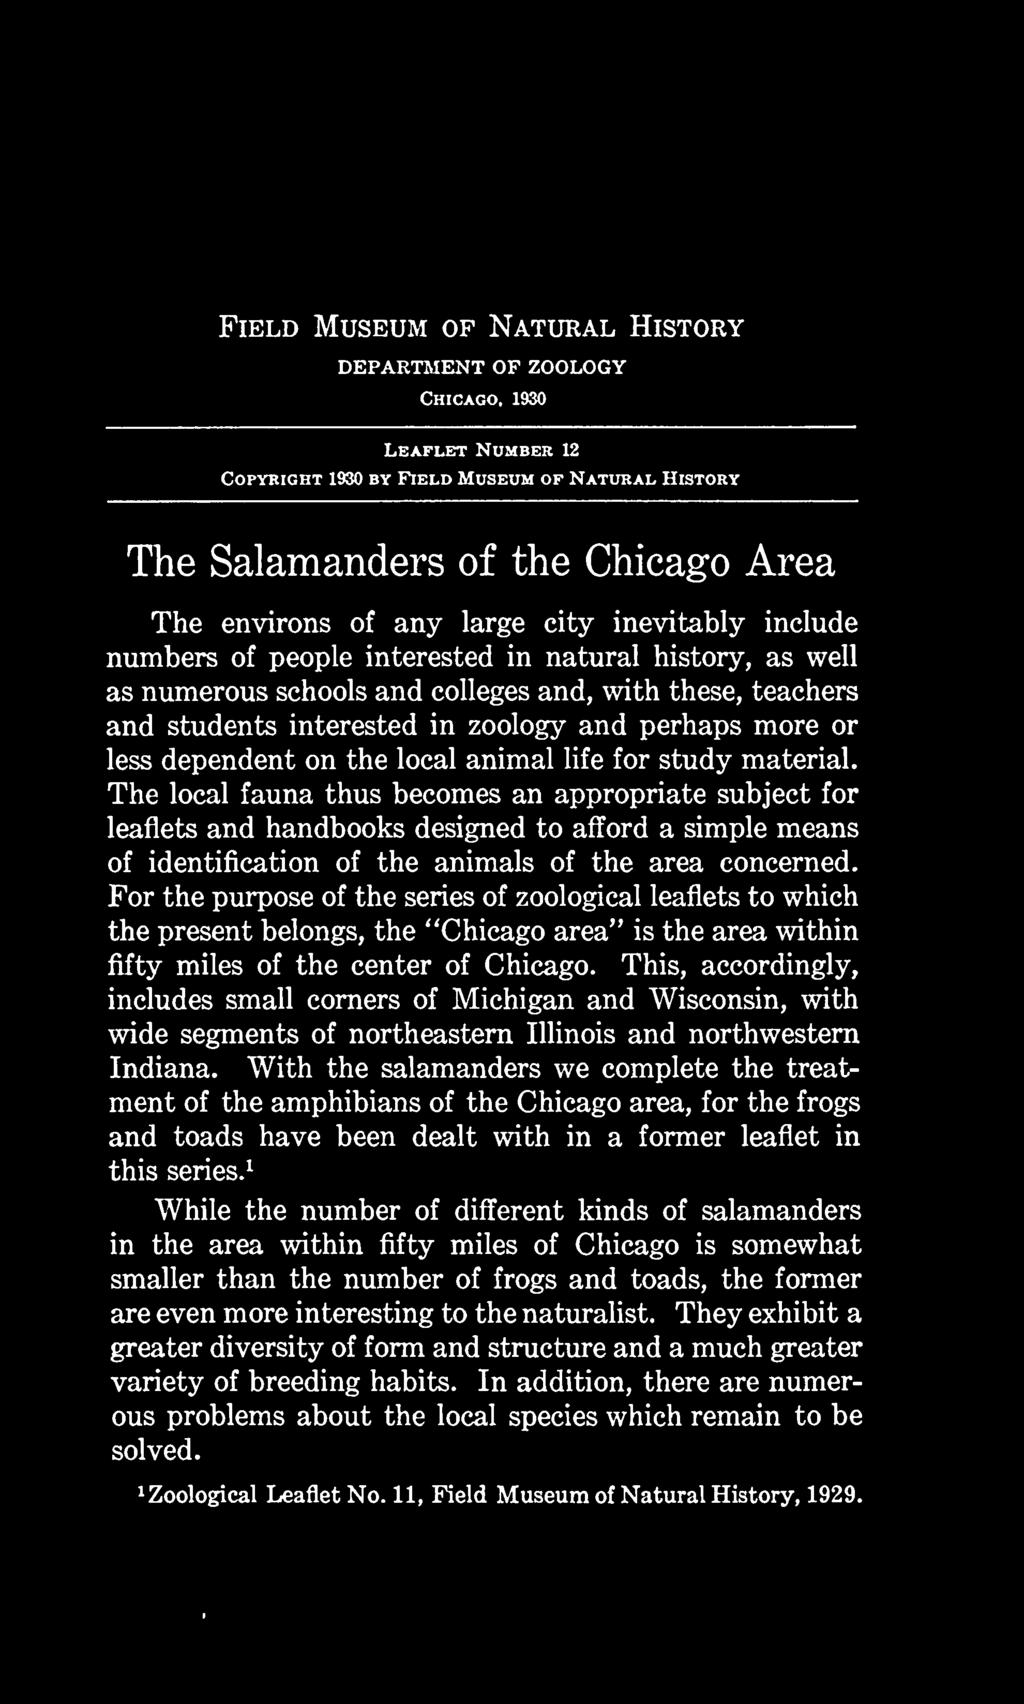 For the purpose of the series of zoological leaflets to which the present belongs, the "Chicago area" is the area within fifty miles of the center of Chicago.